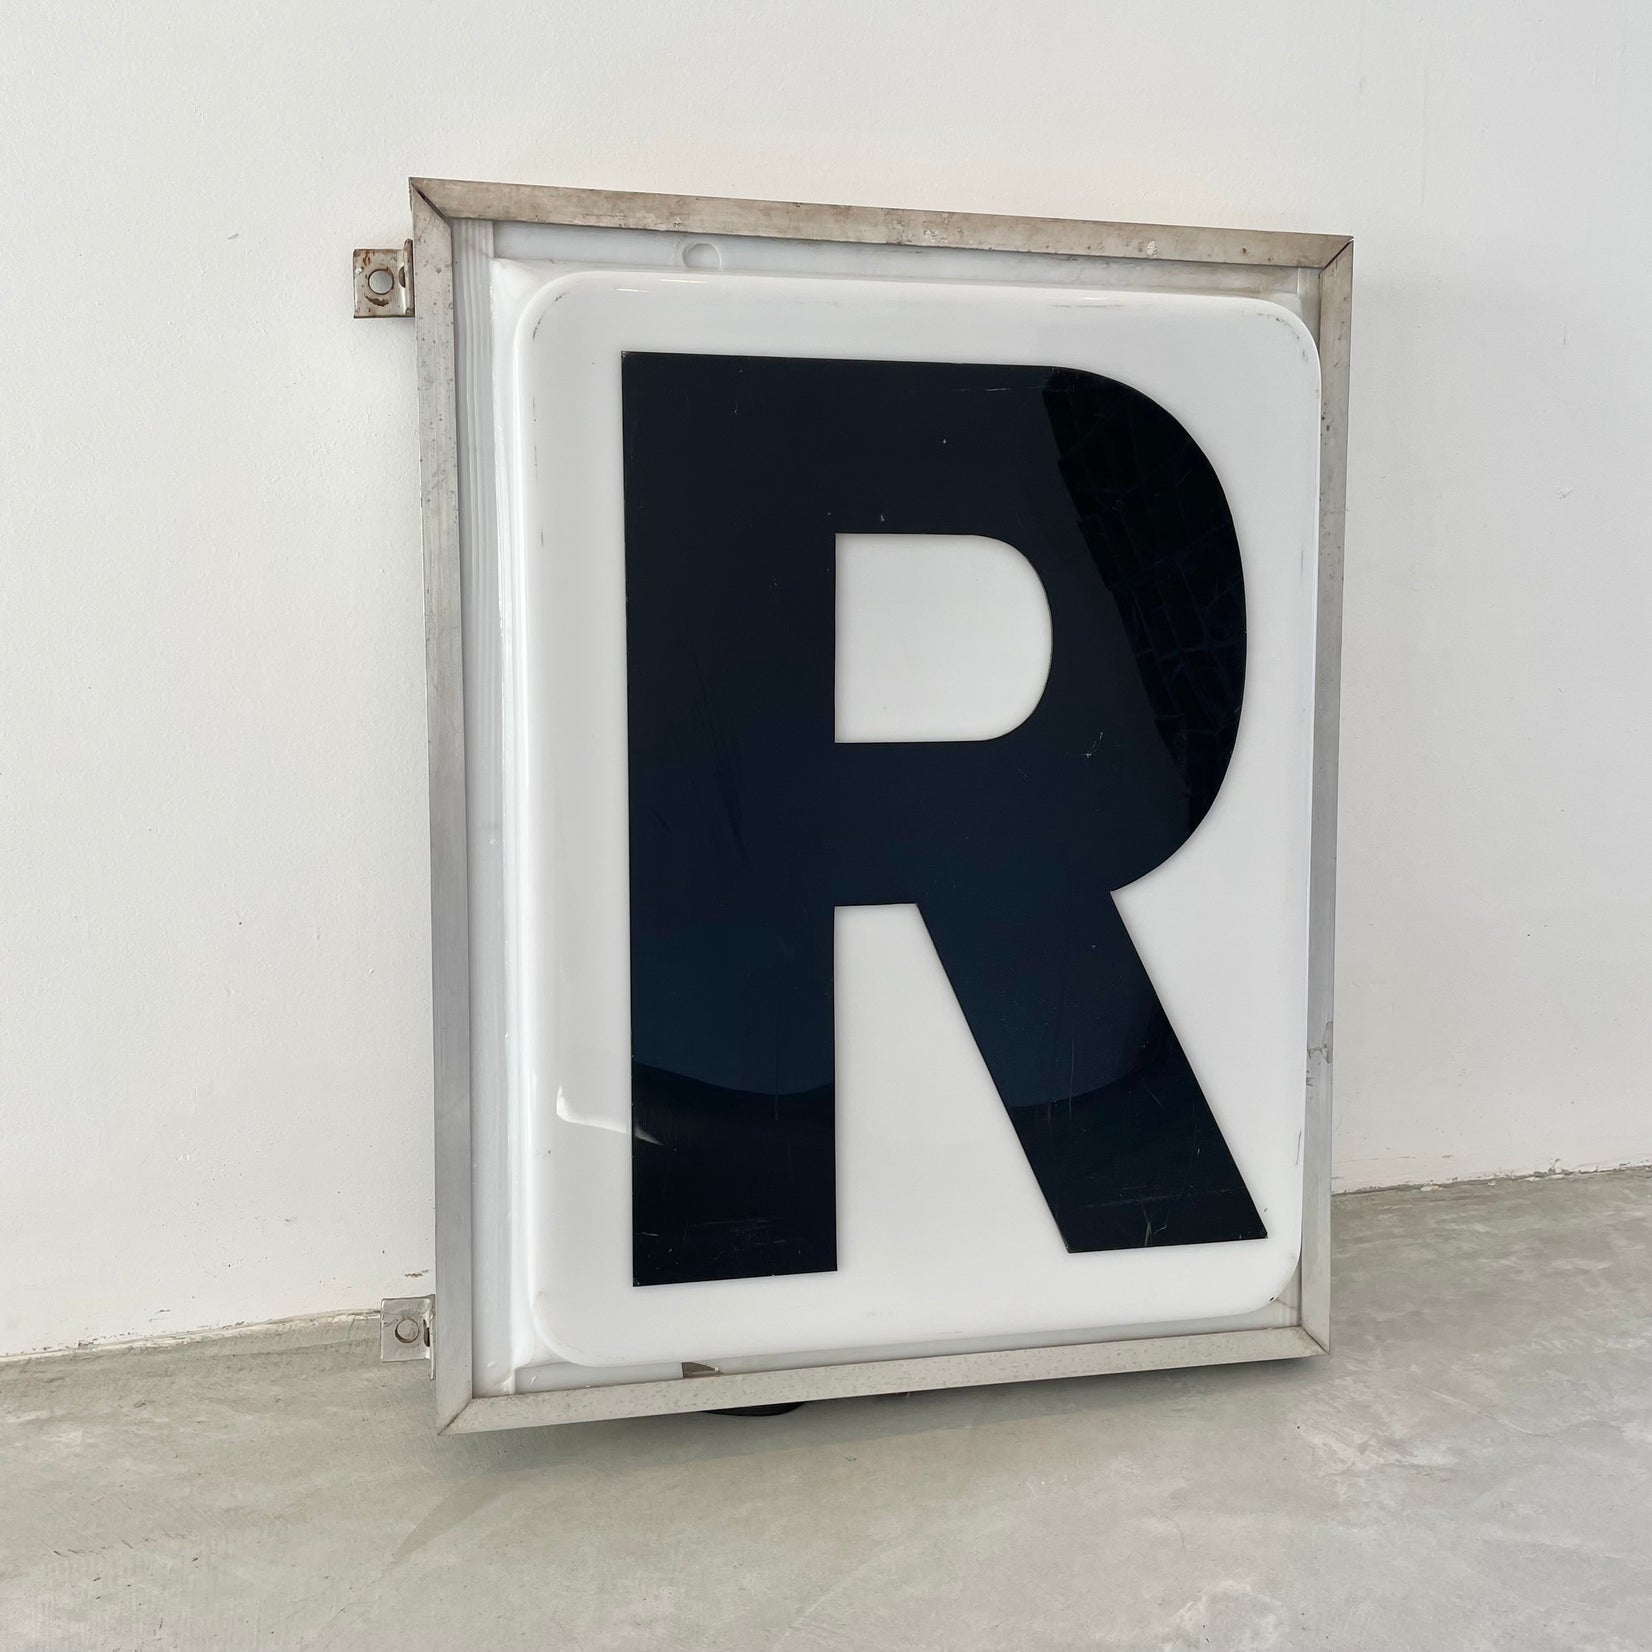 Large Industrial Illuminating Letter "R" Sign, USA circa 1950